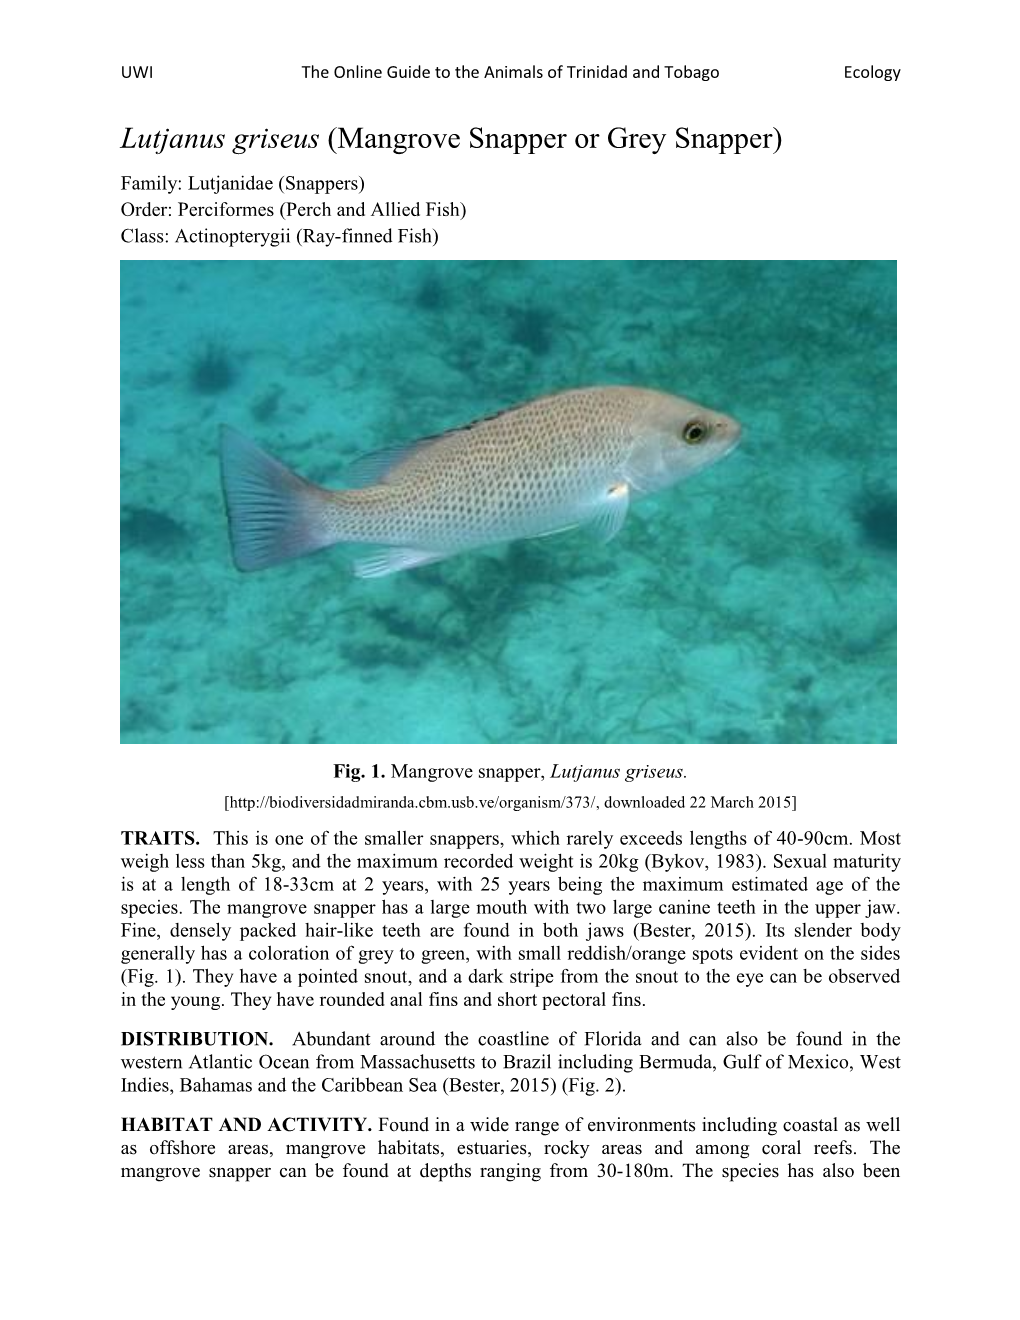 Lutjanus Griseus (Mangrove Snapper Or Grey Snapper) Family: Lutjanidae (Snappers) Order: Perciformes (Perch and Allied Fish) Class: Actinopterygii (Ray-Finned Fish)